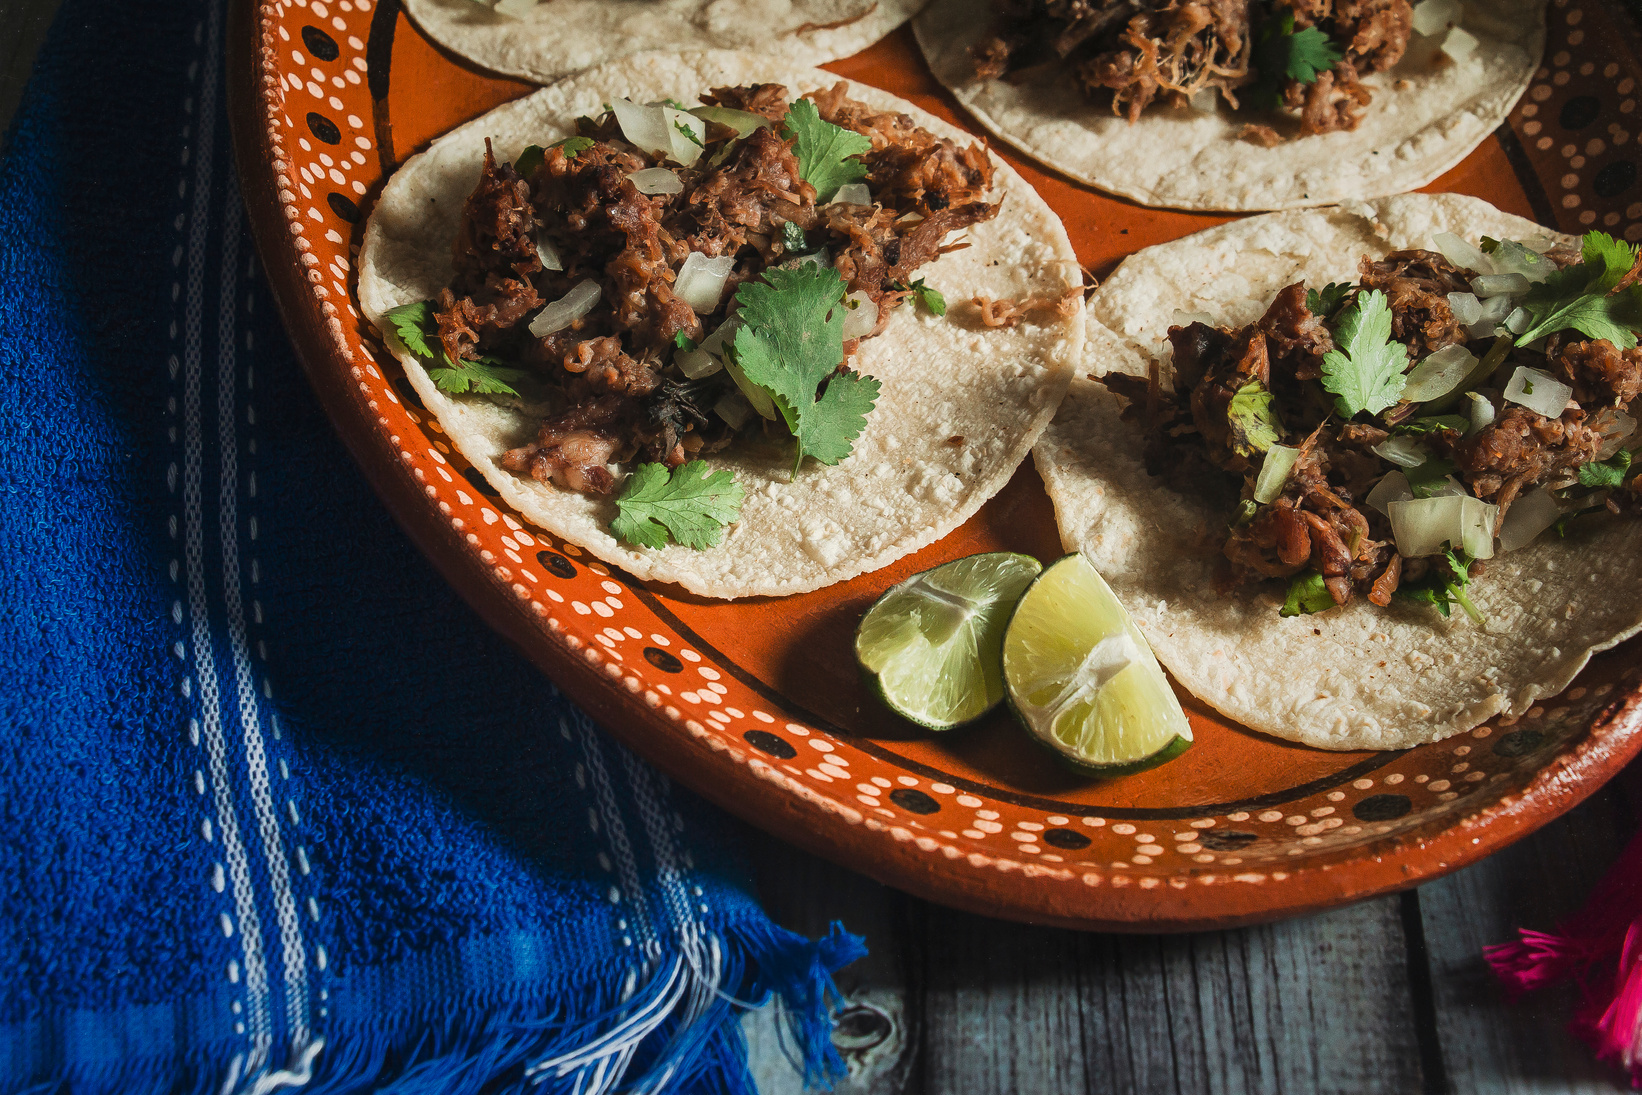 Delicious Tacos of Barbecue on Mexican Clay Plates